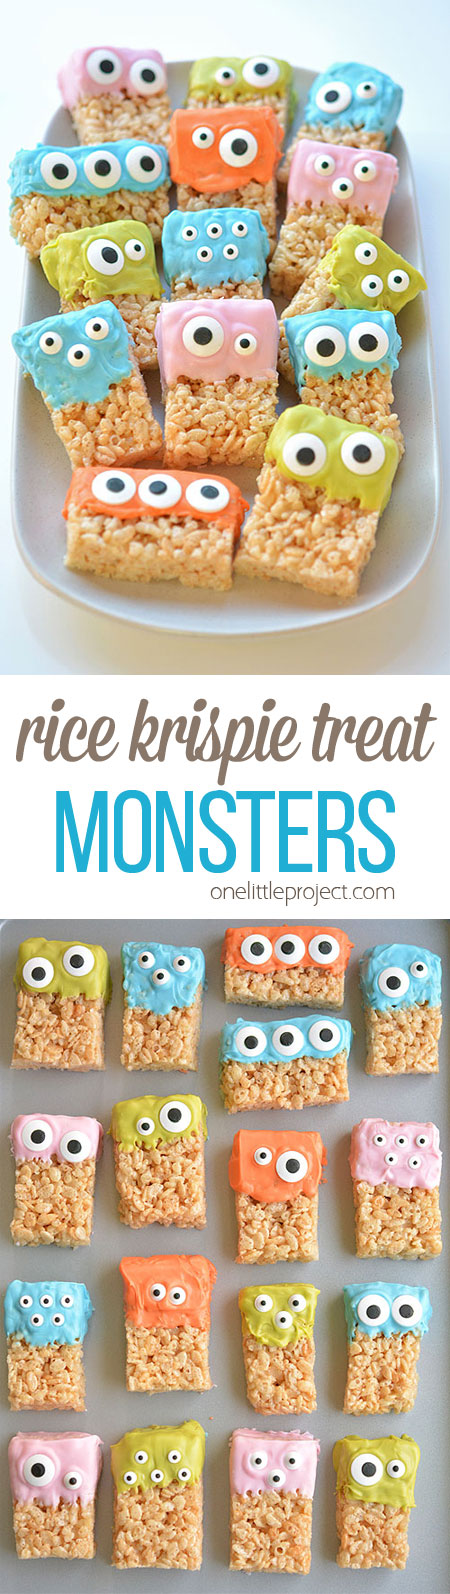 These Rice Krispie Treat Monsters are SO EASY and they're completely adorable! They're awesome for a Halloween party or even a monster birthday party! So fun!